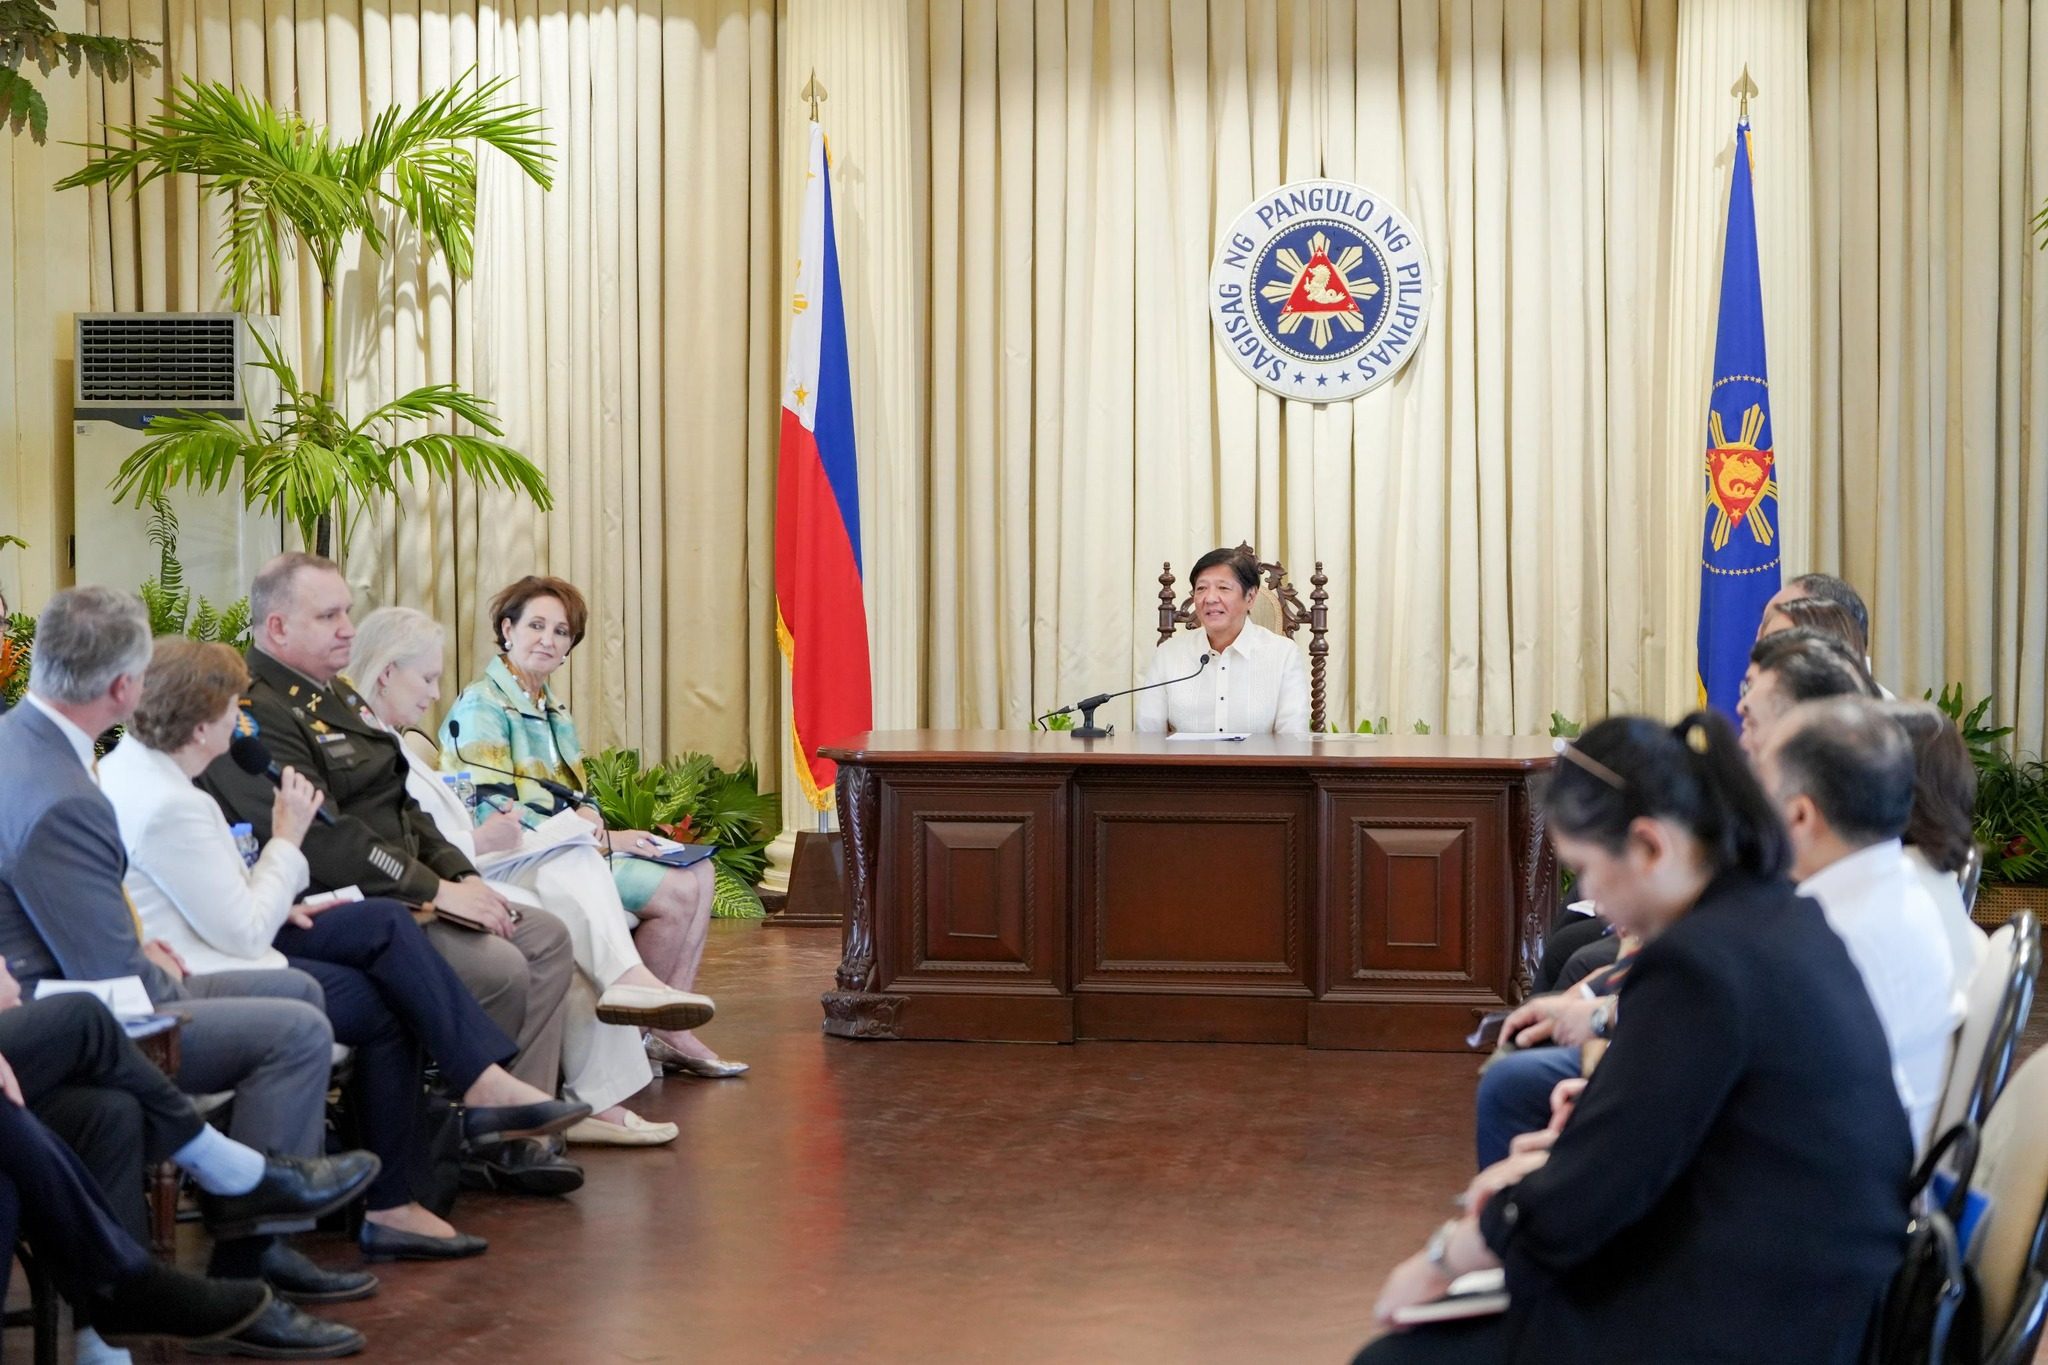 In Malacañang visit, US lawmakers affirm support for PH as row with China worsens